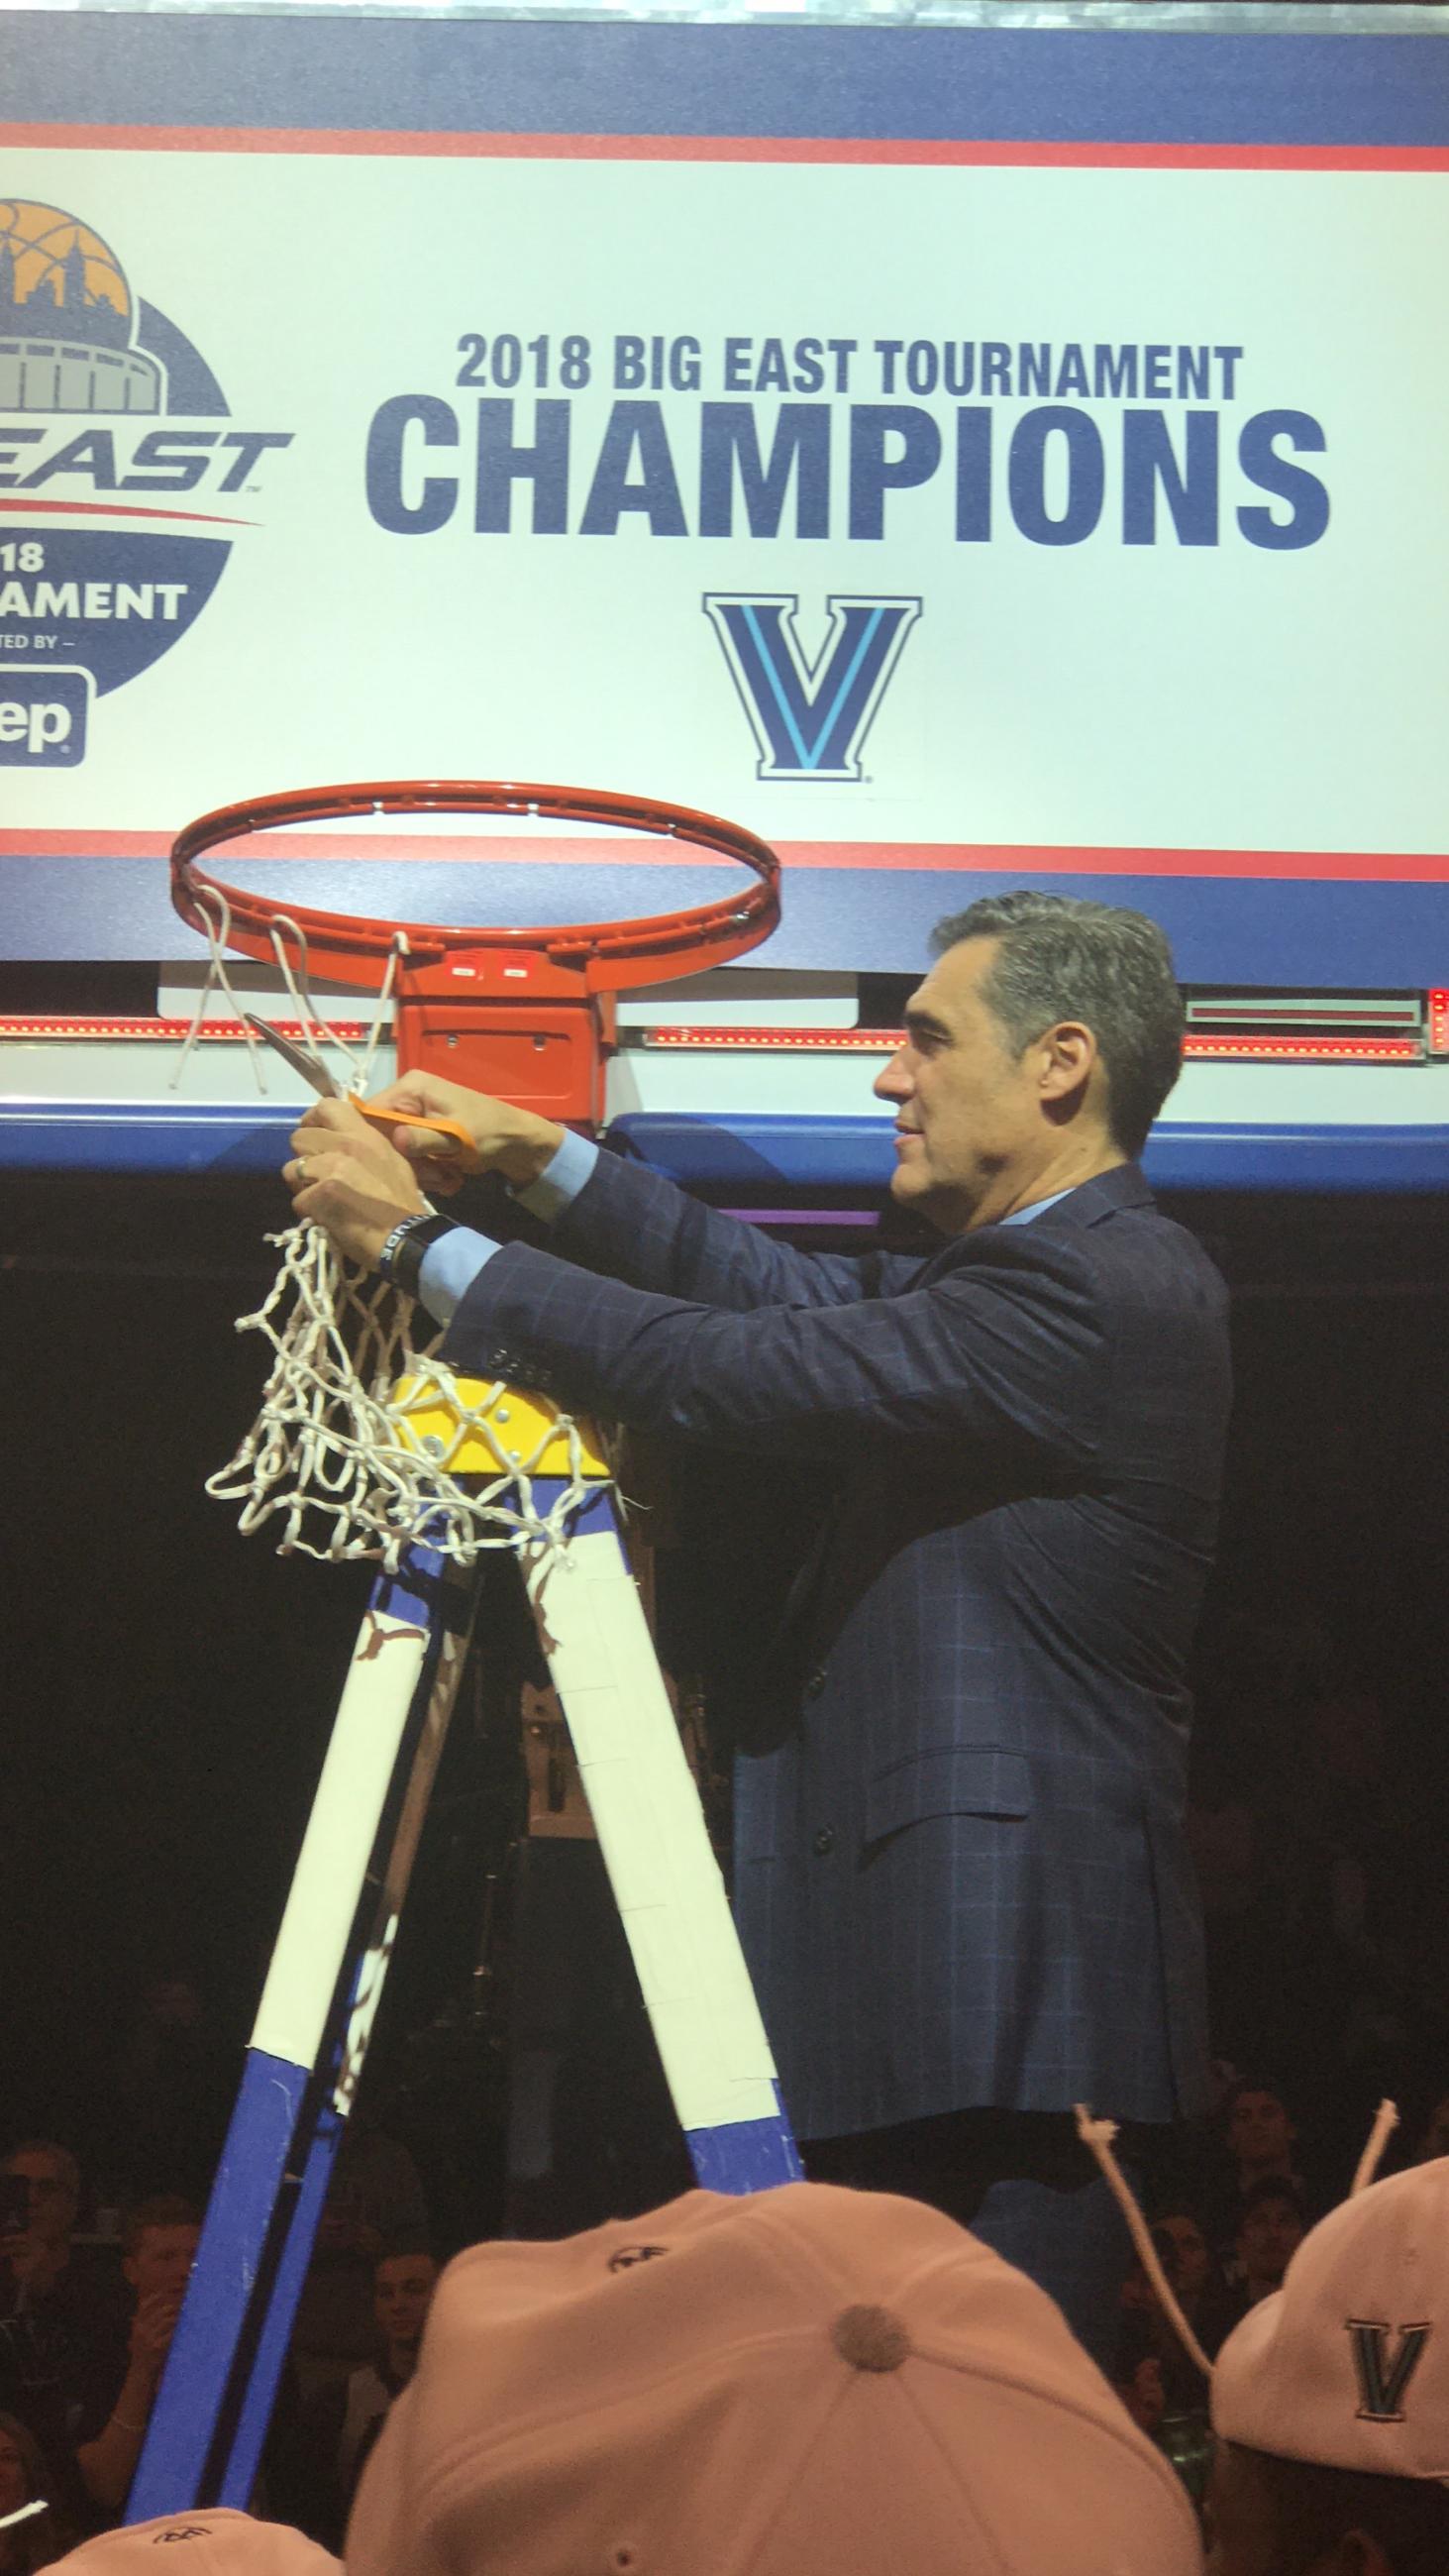 Jay Wright cutting the net after winning the Big East Crown.